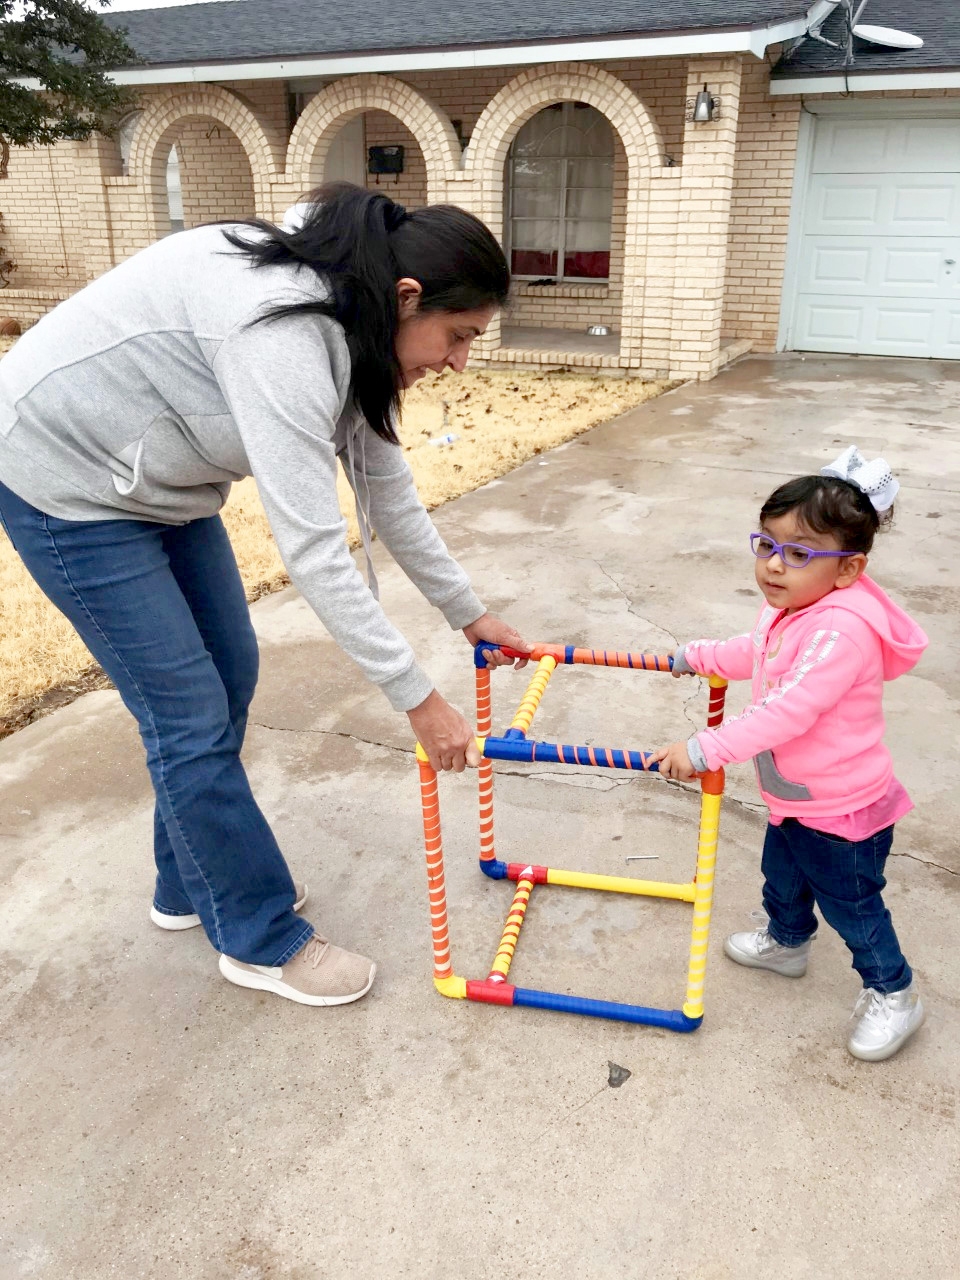 With a little help from Birth-to-3 Orientation & Mobility Specialist Ms. Sophia Diaz, Nayelli works on taking steps using her new Adapted Mobility Device.jpg